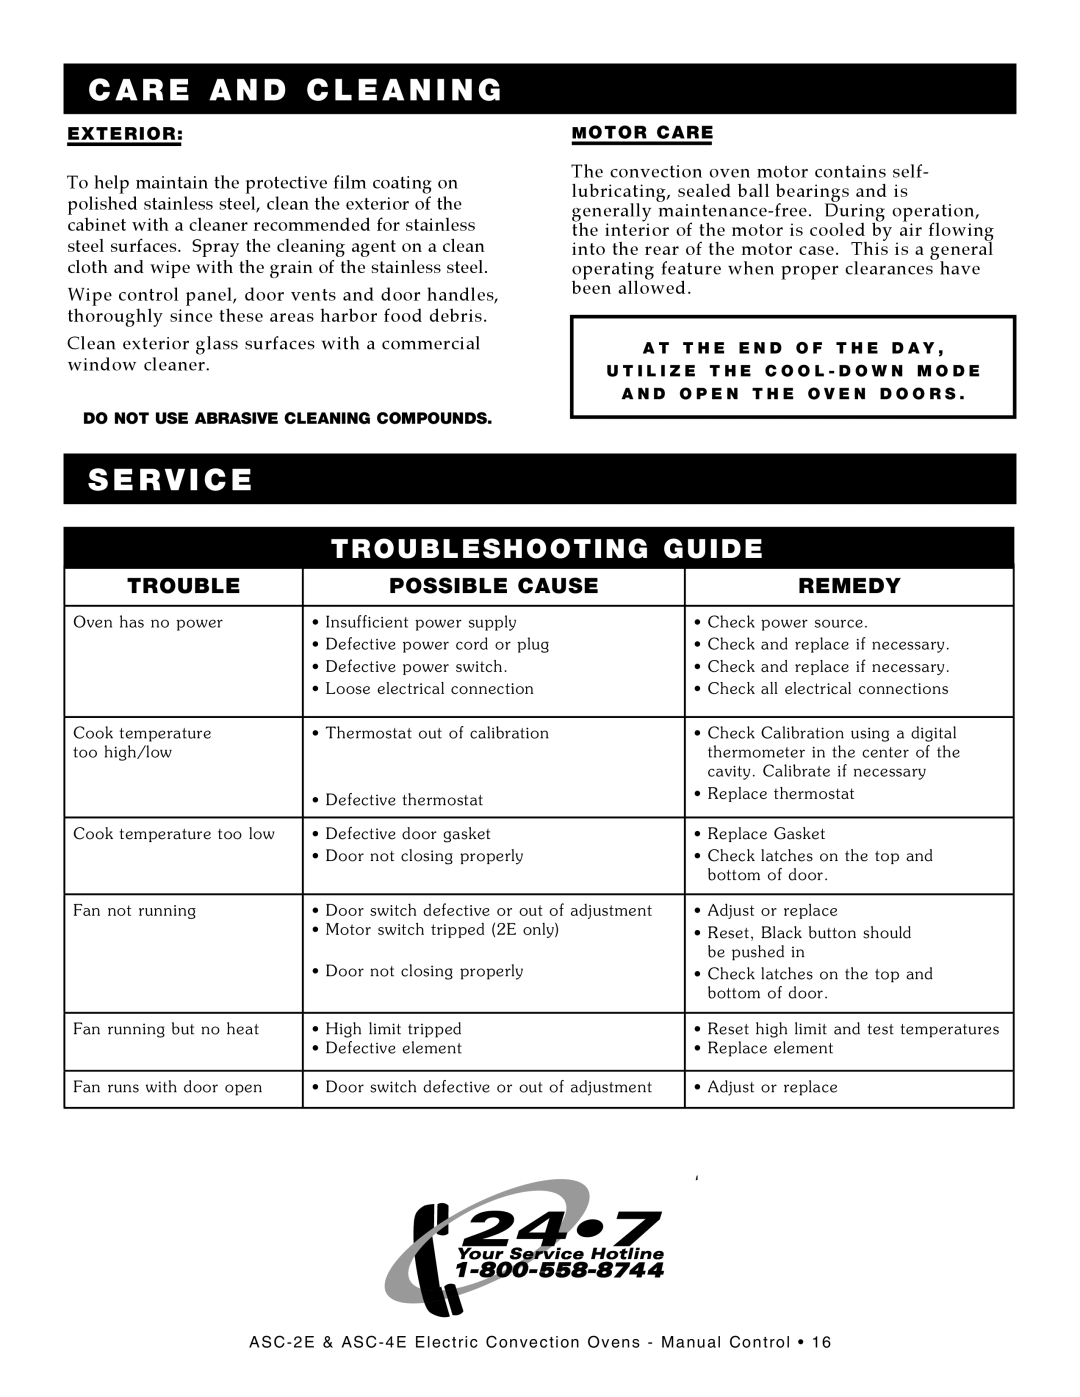 Alto-Shaam ASC-4E Service, Possible Cause, Remedy, Care And Cleaning, Troubleshooting Guide, Exterior, Motor Care 